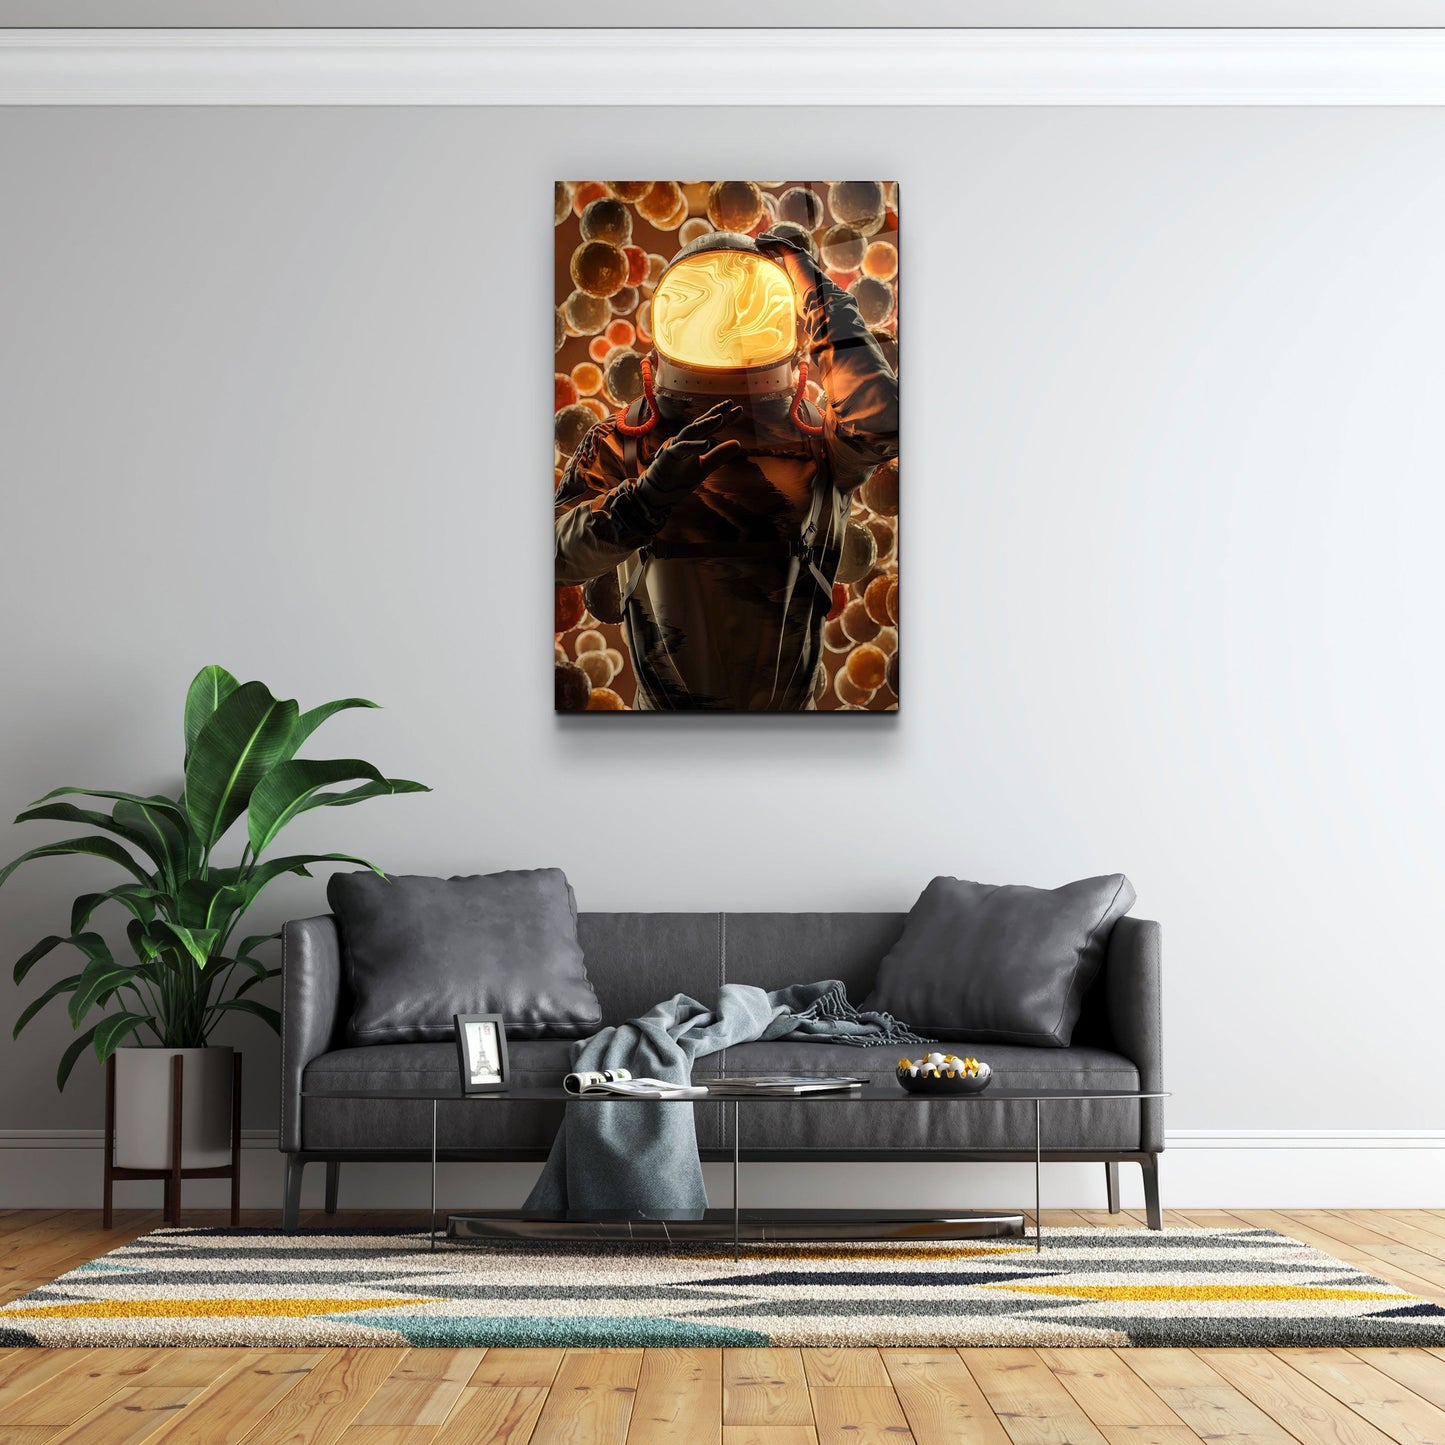 Astronaut is Lava - Designer's Collection Glass Wall Art